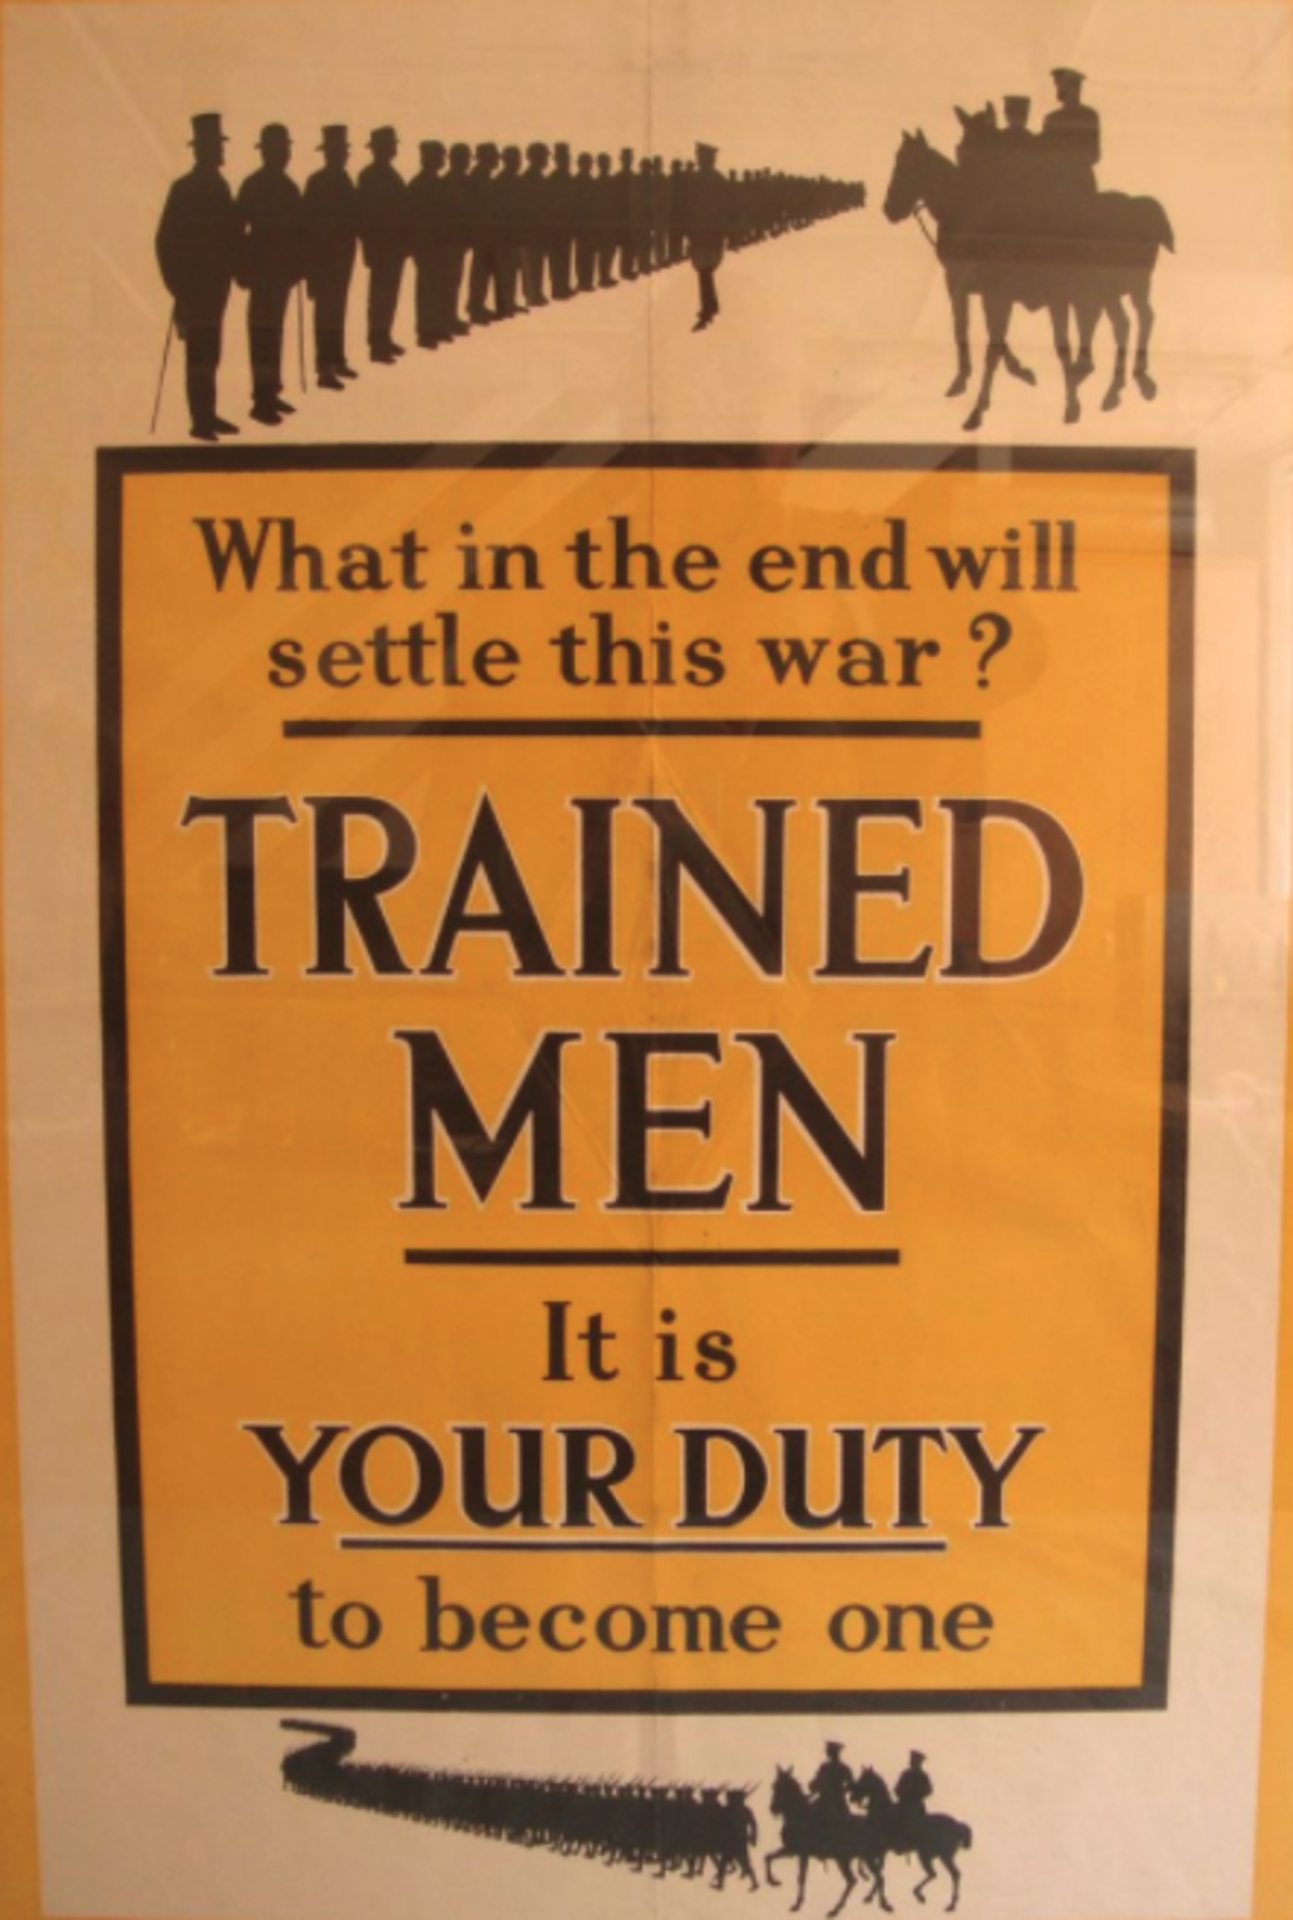 Original Framed WW1 British Government Parliamentary Recruiting Committee Recruitment Poster - Image 2 of 3